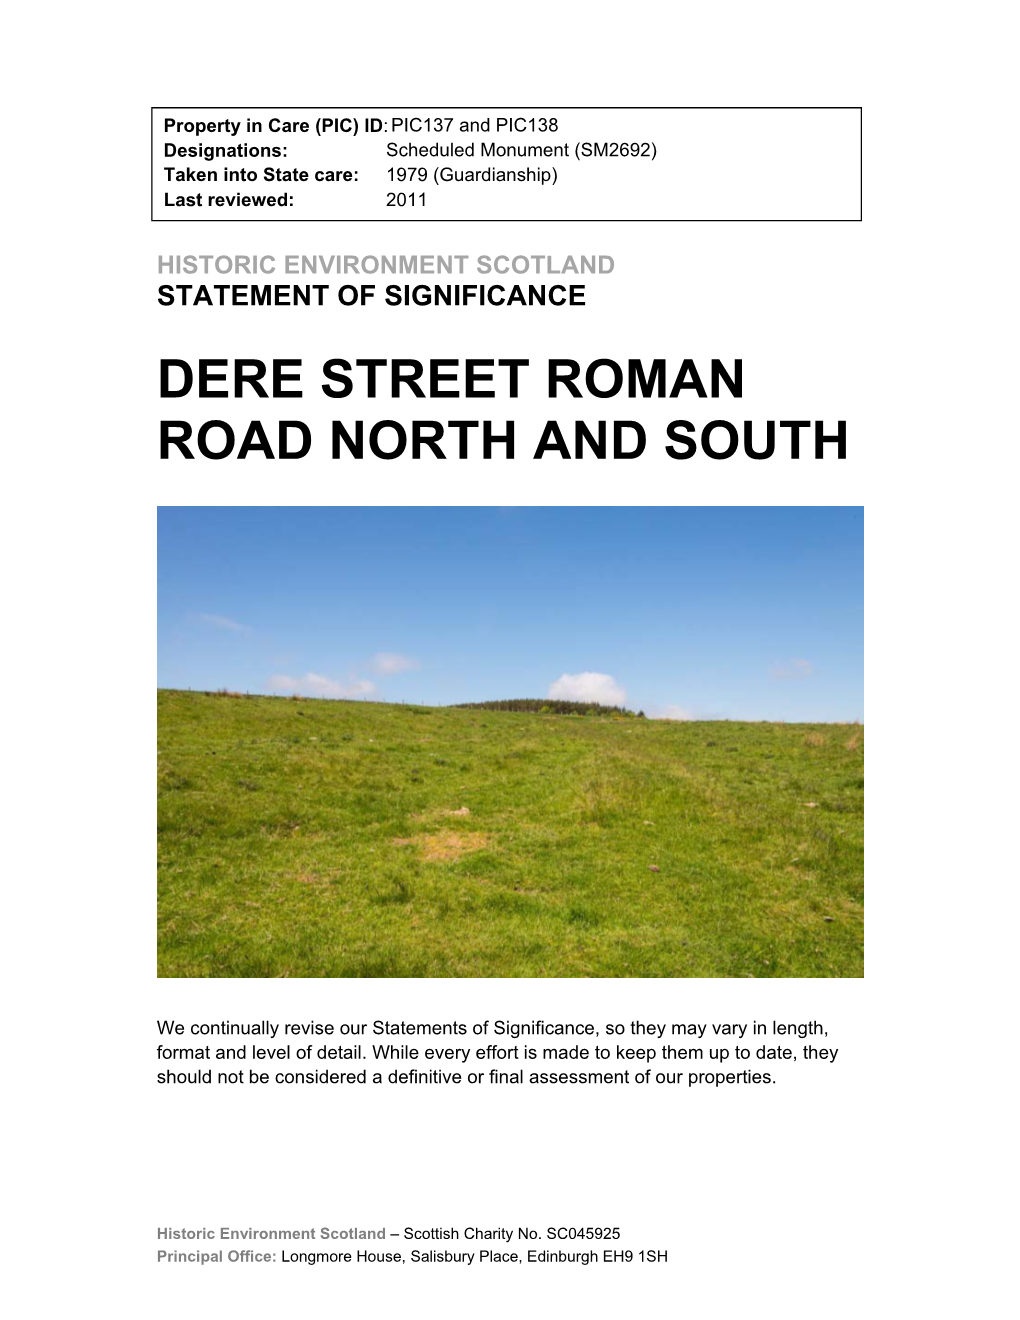 Dere Street Roman Road North and South